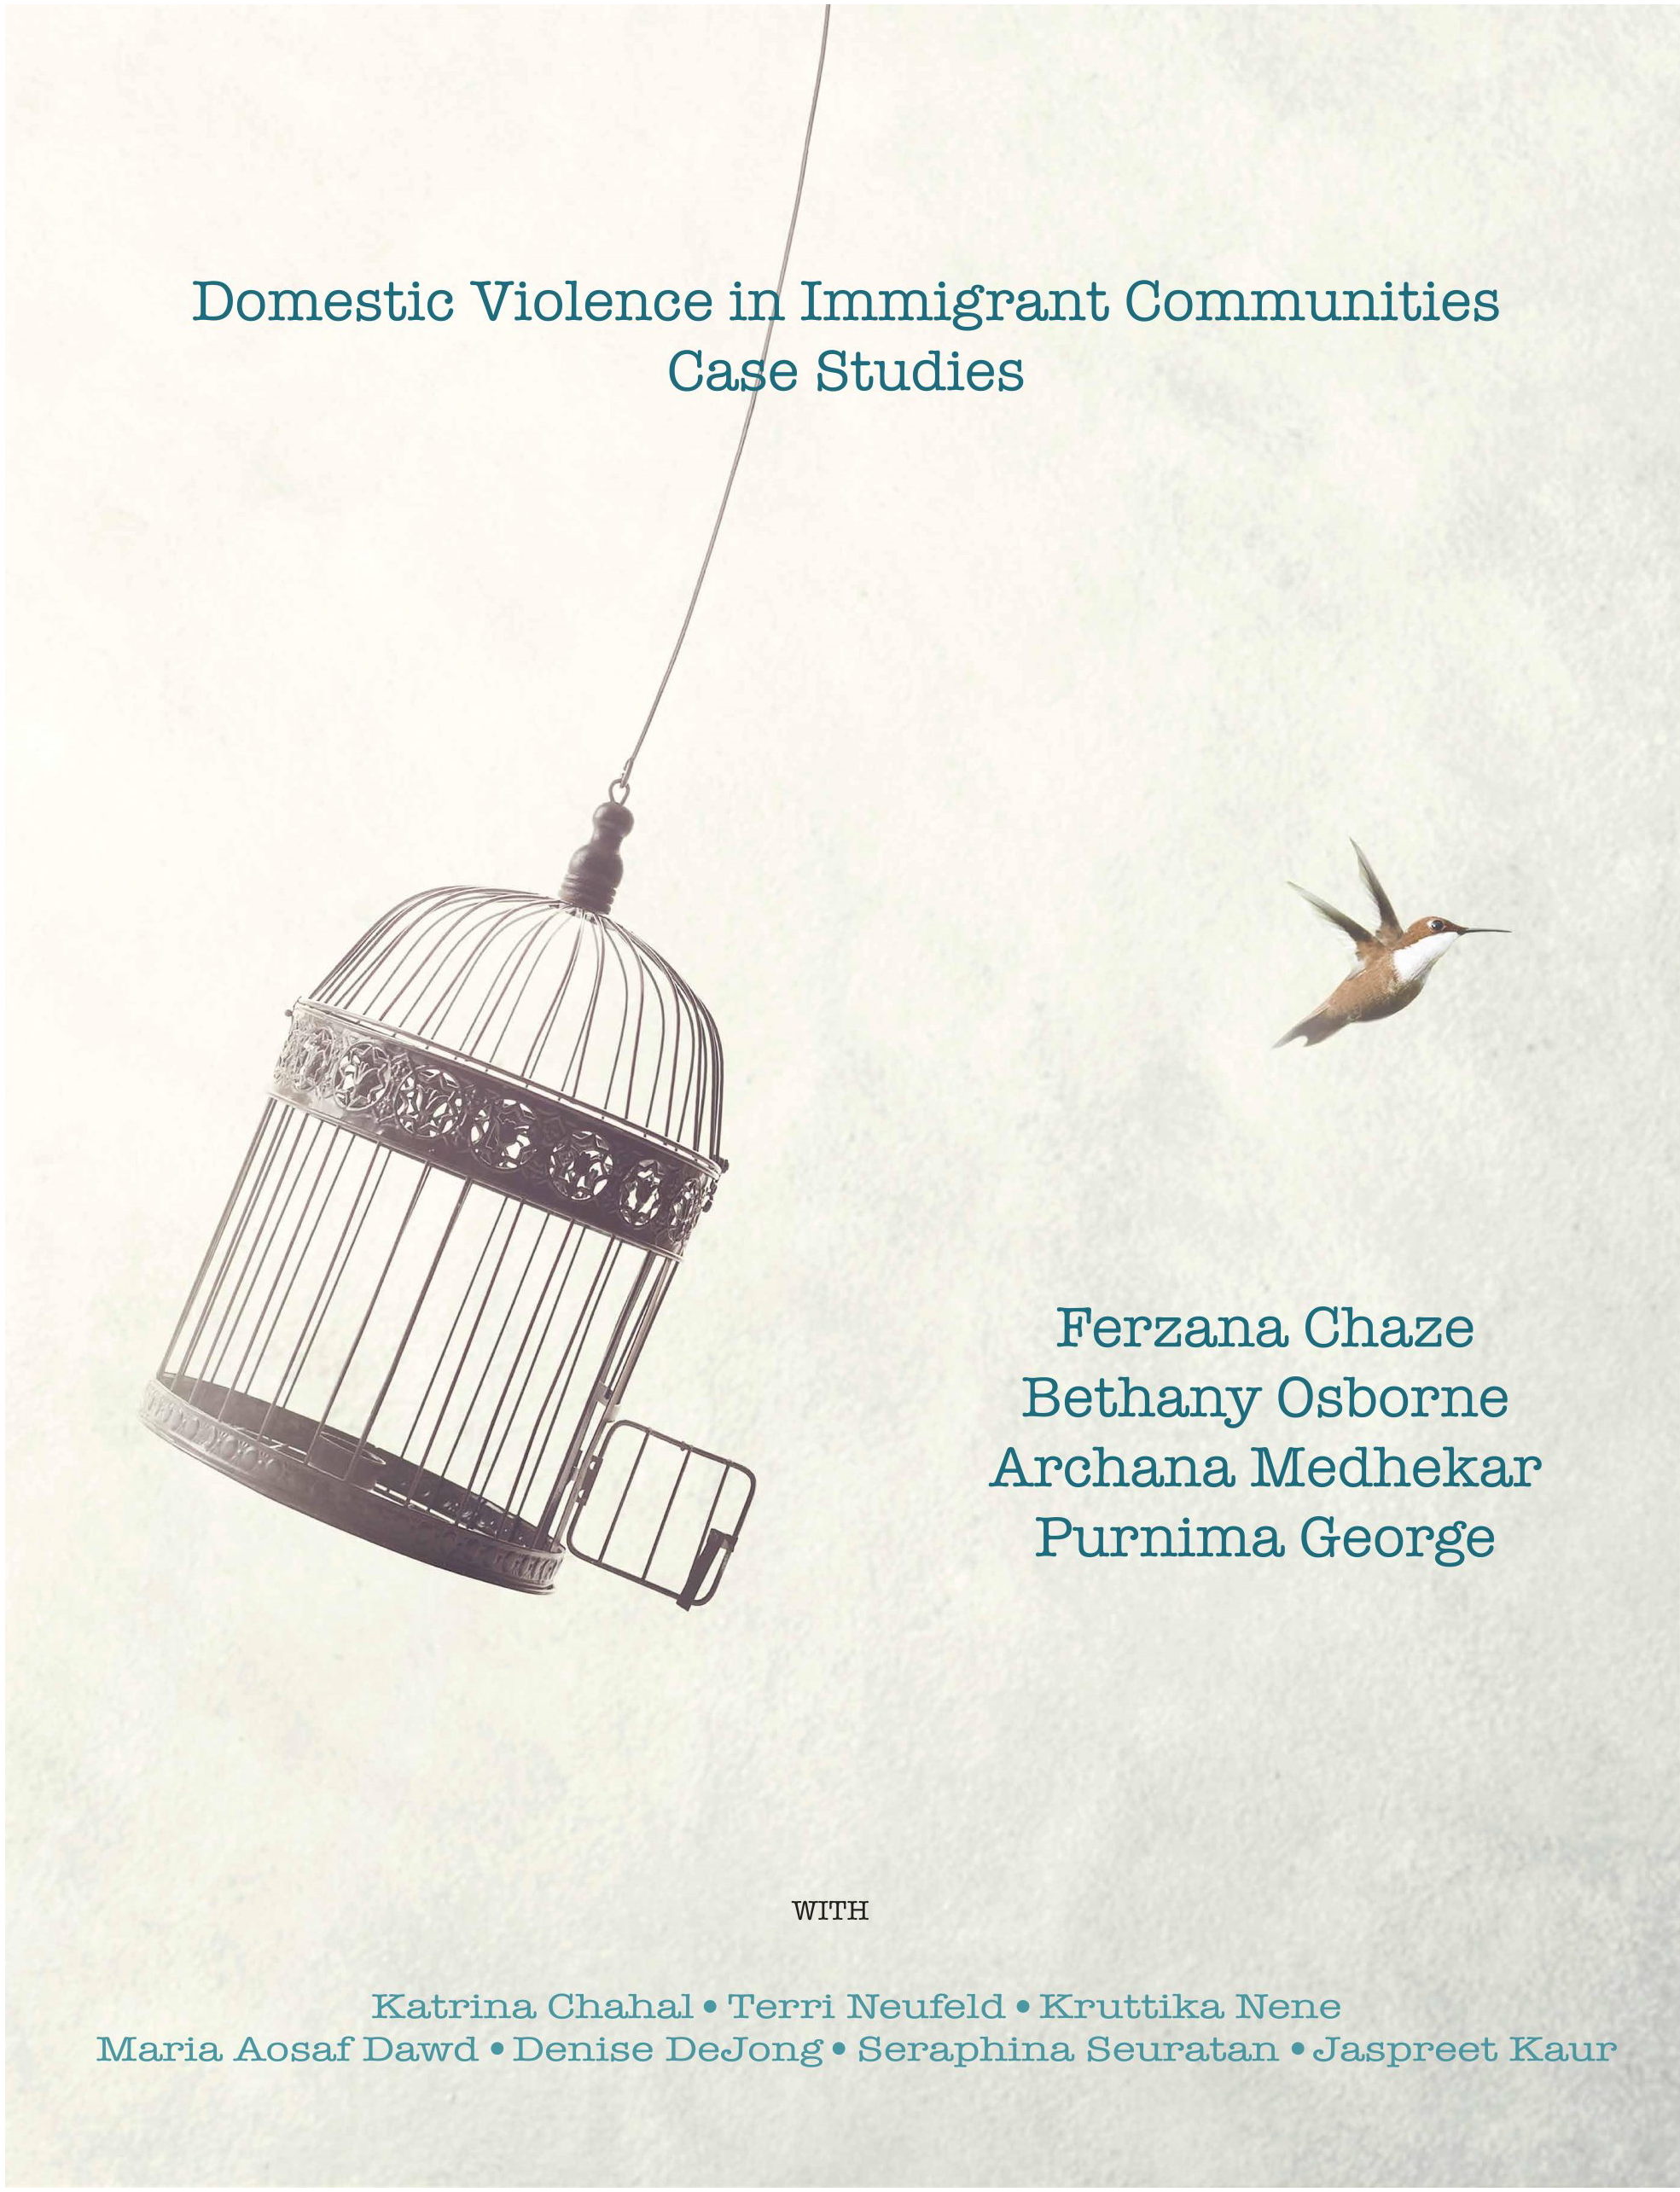 Domestic Violence in Immigrant Communities